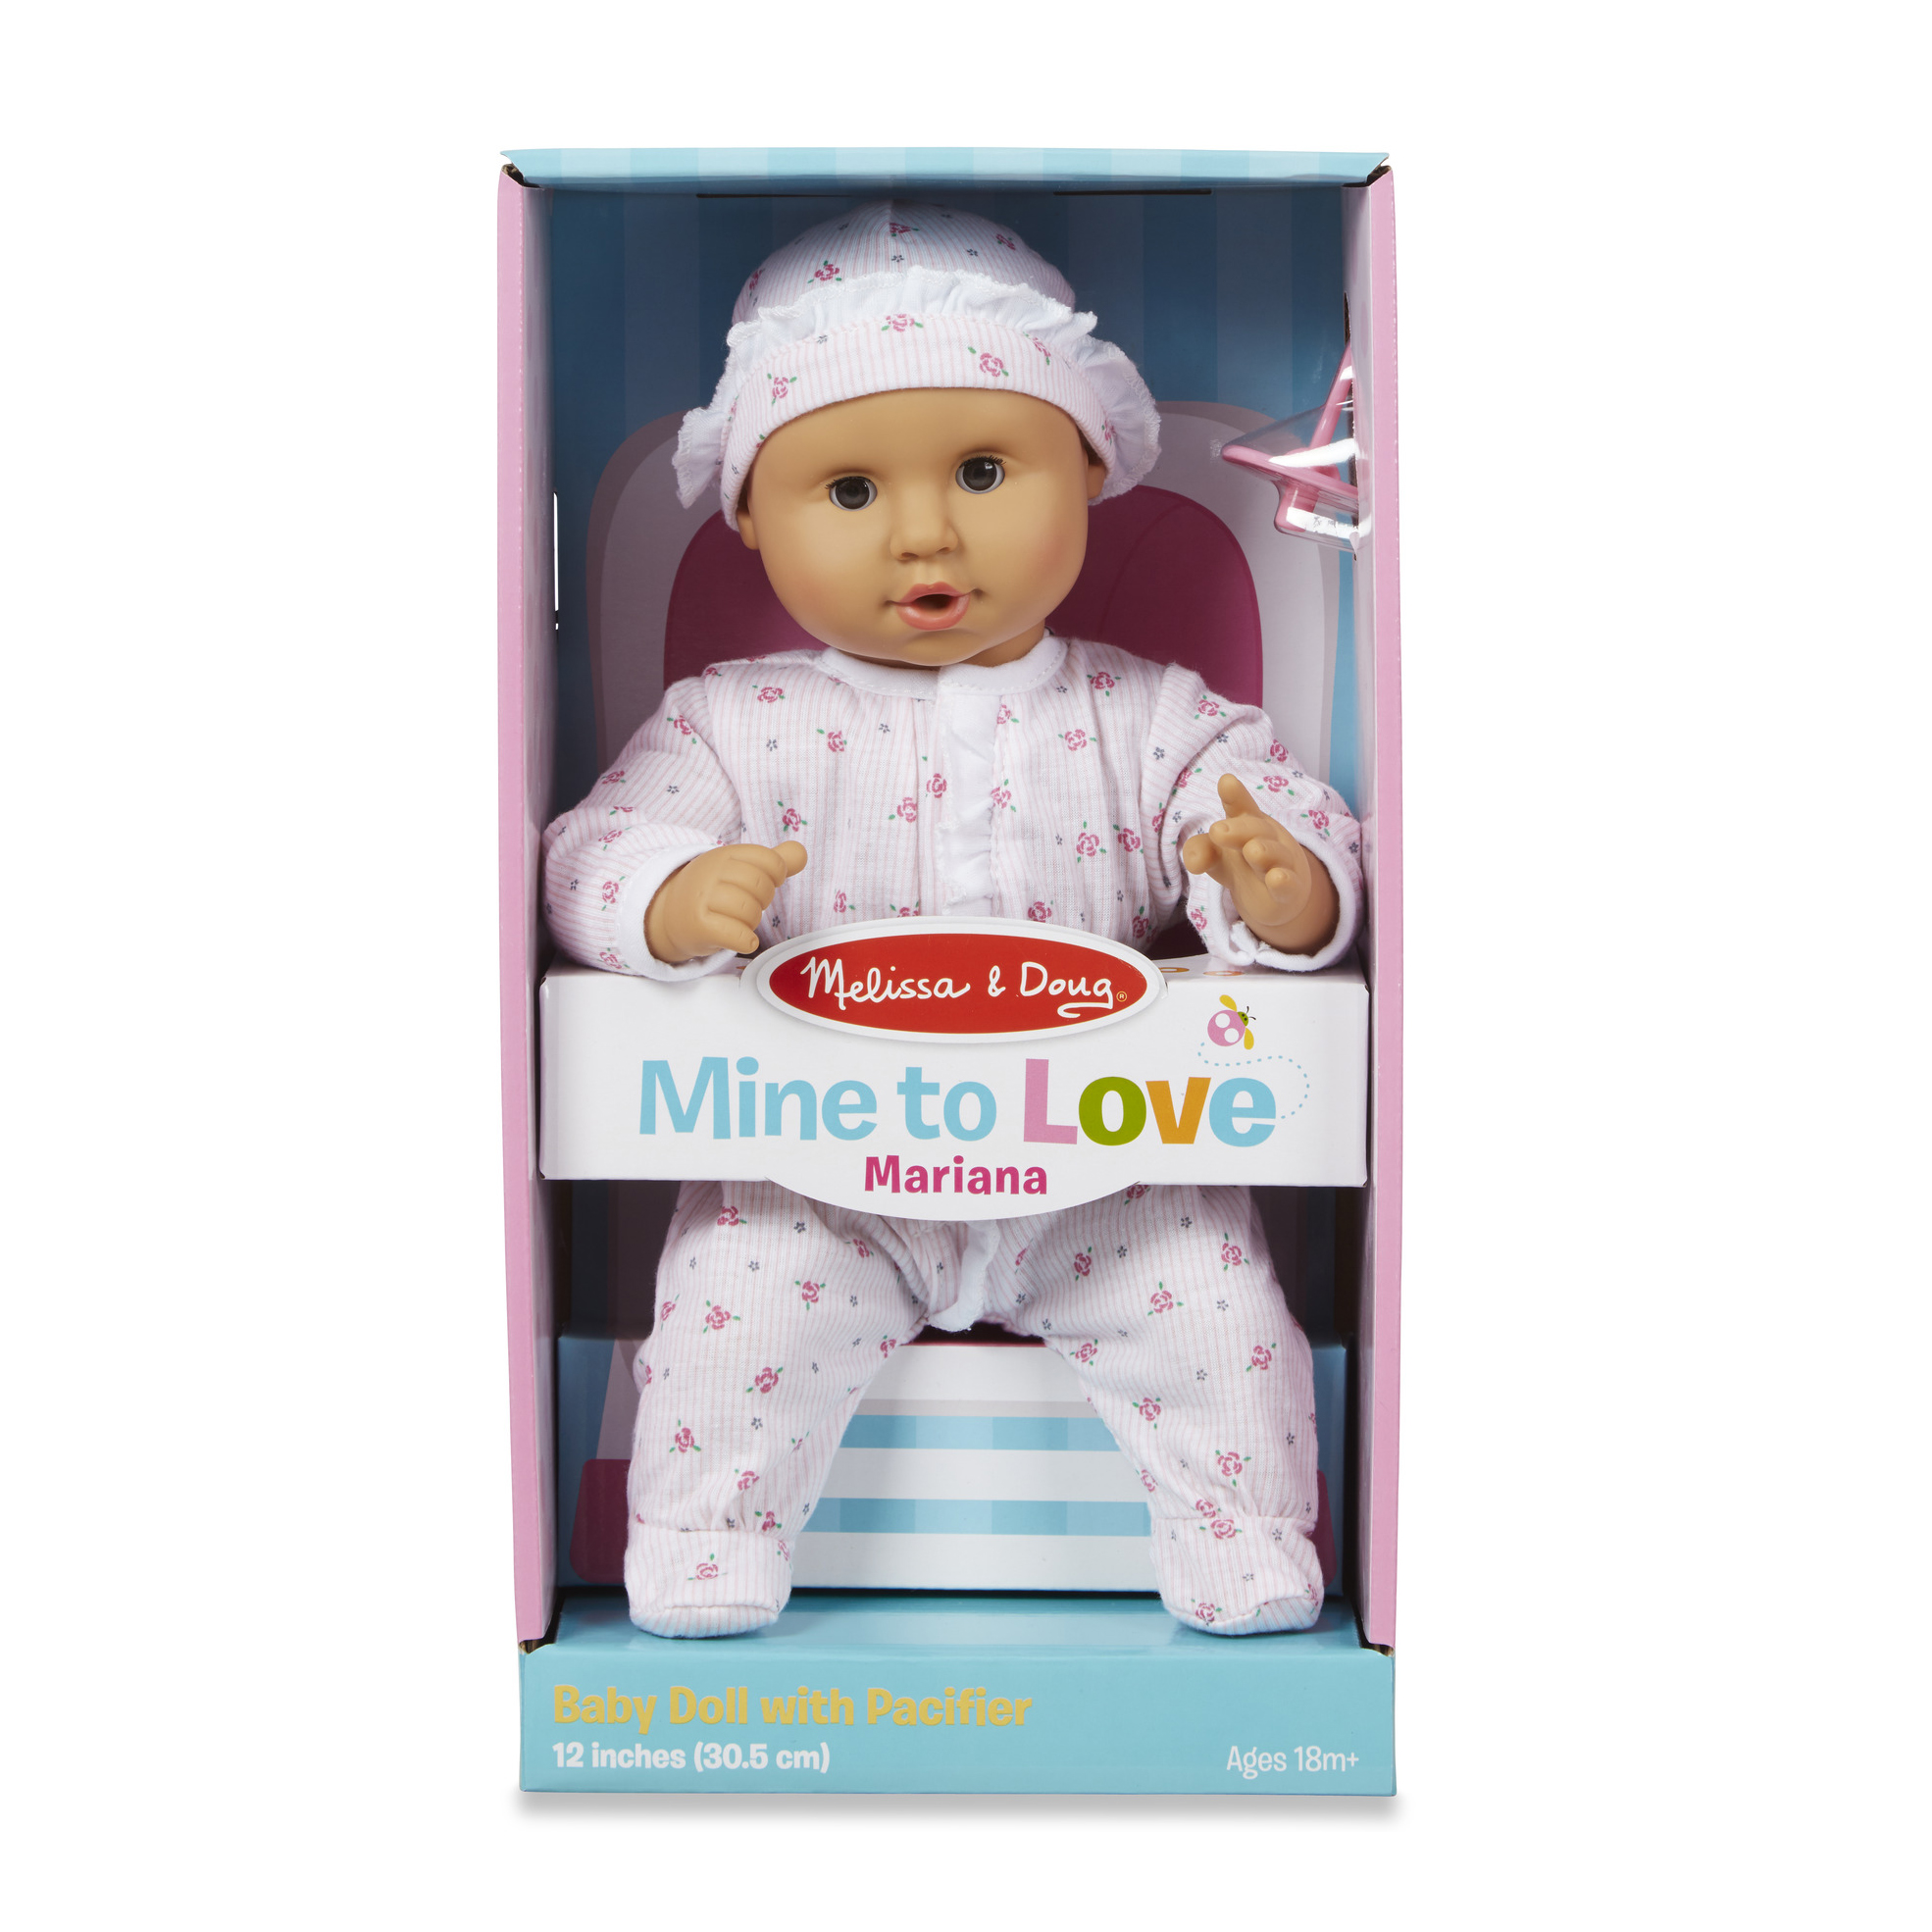 Mine To Love Mariana 12-inch Baby Doll, Romper And Hat Included, Wipe-clean Arms & Legs